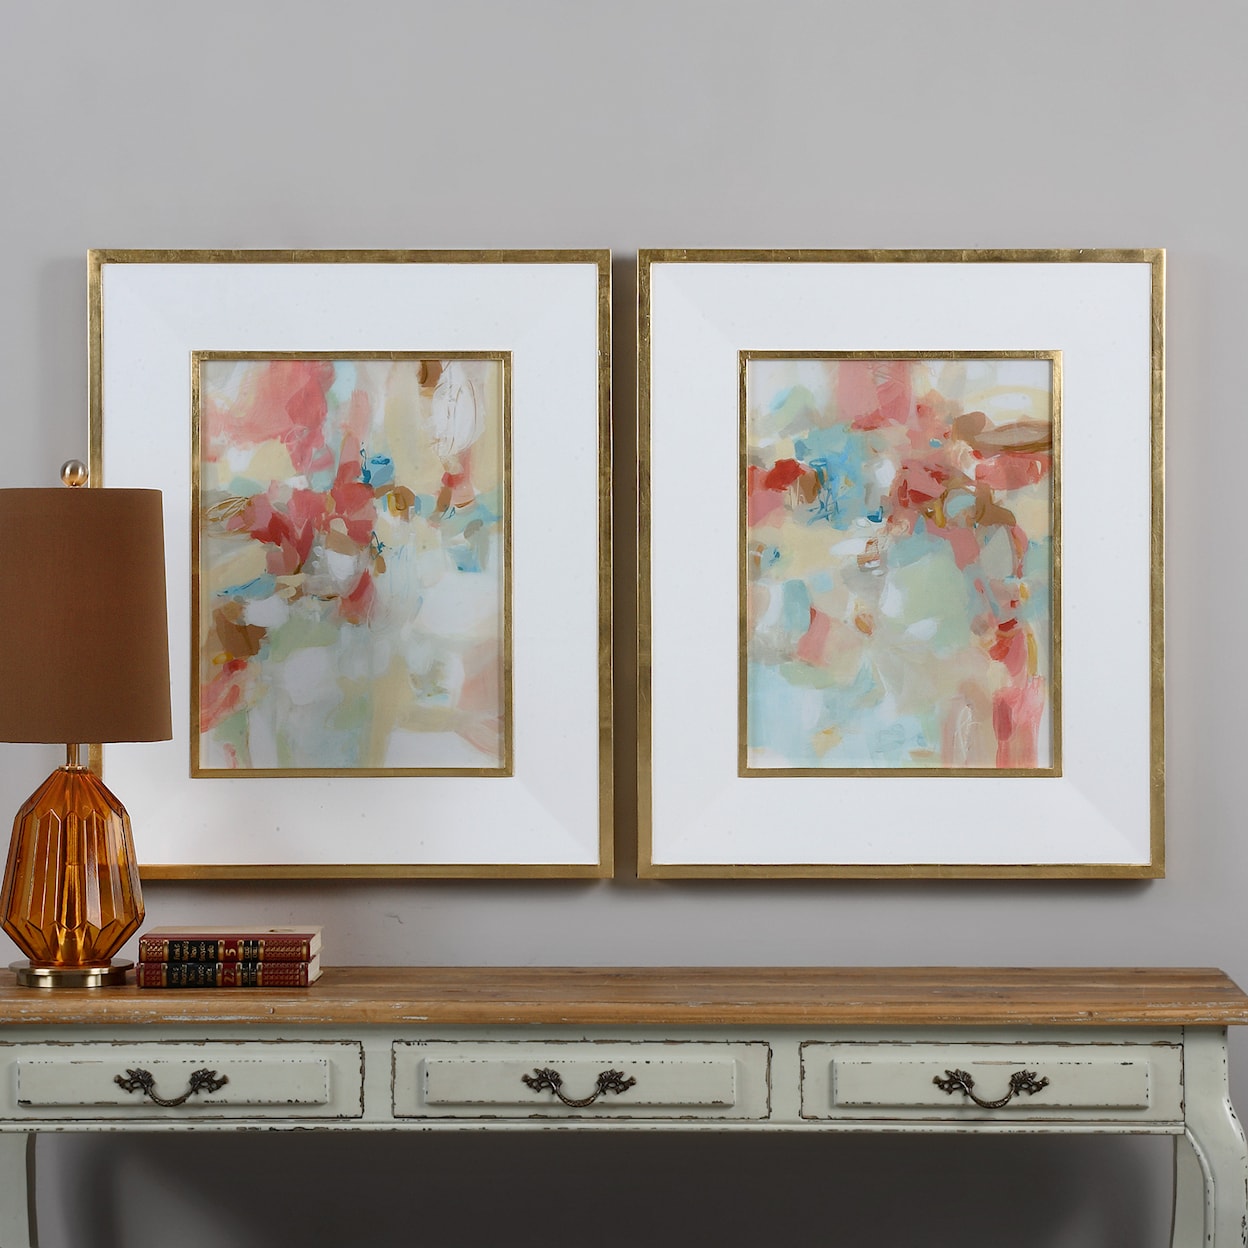 Uttermost Framed Prints A Touch Of Blush And Rosewood Fences Art, S/